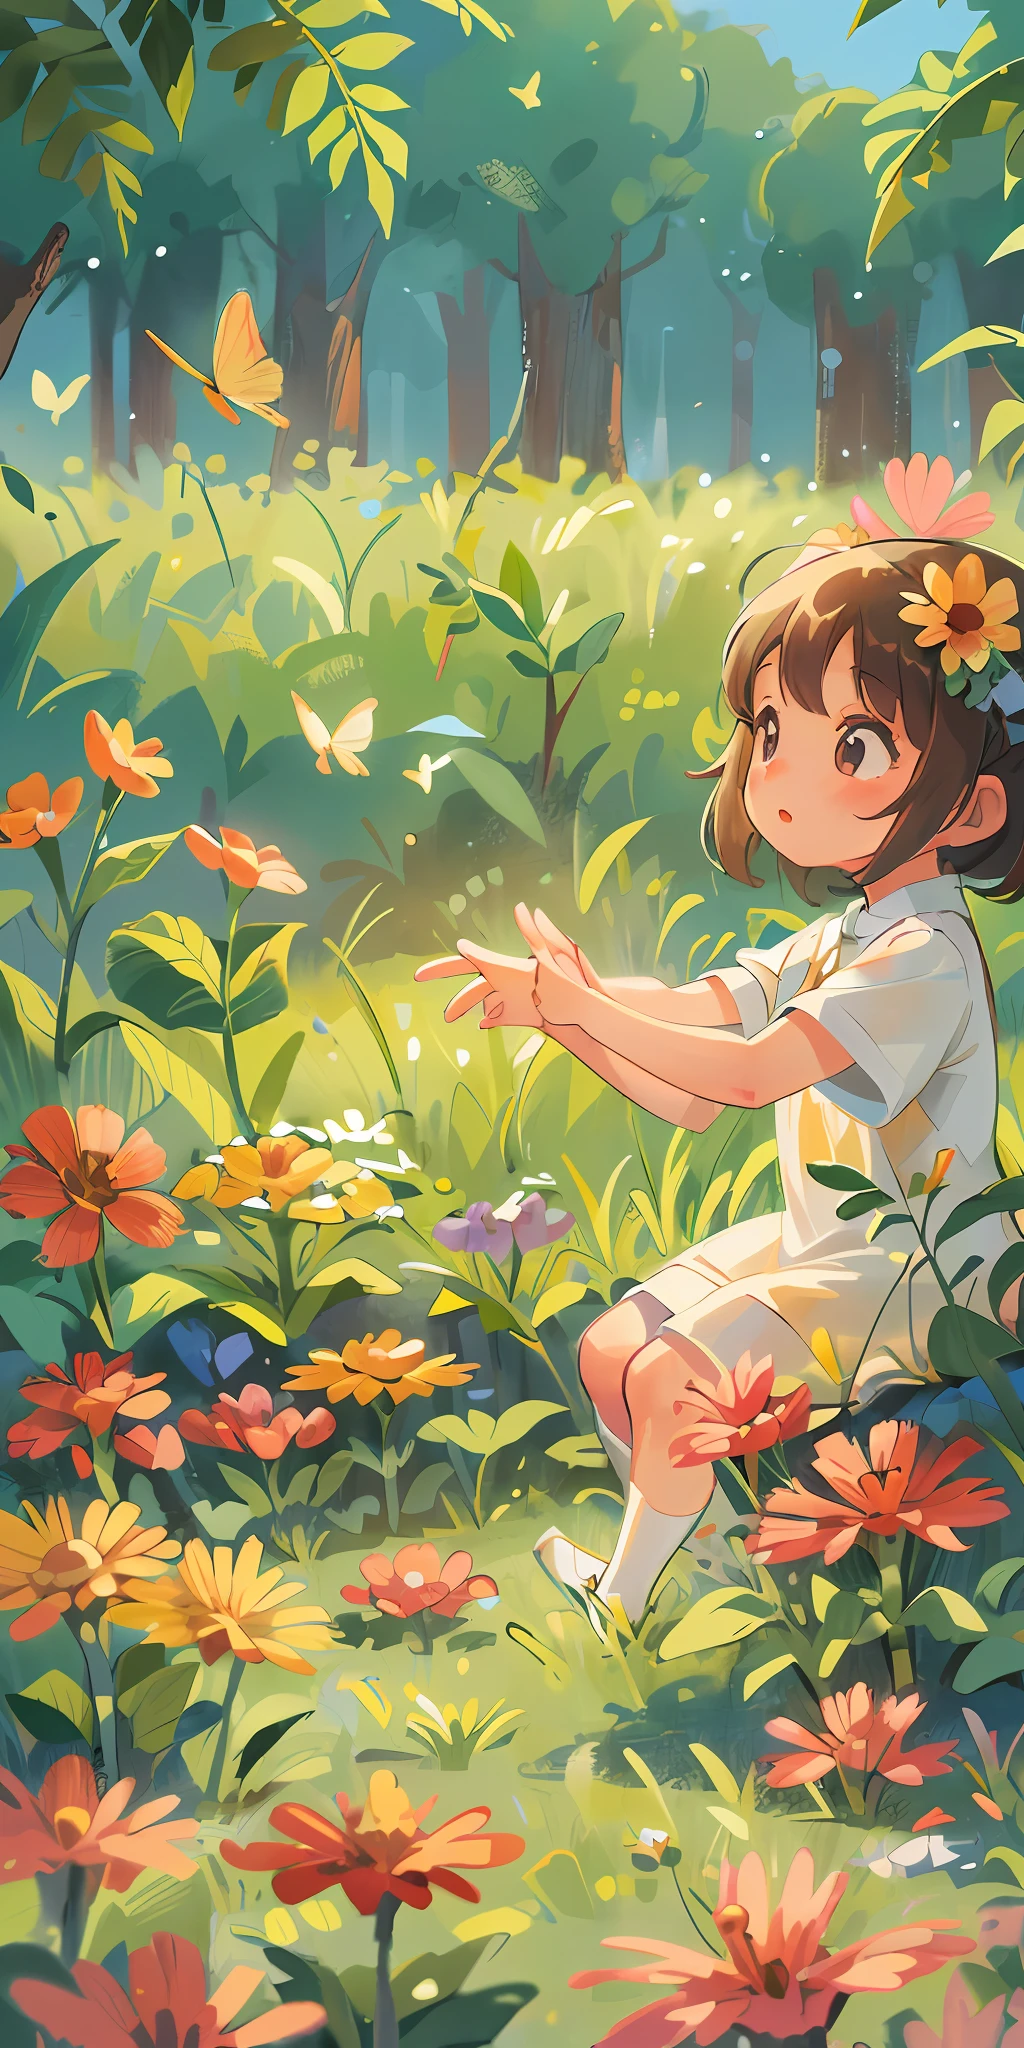 High Detail, Ultra Detail, Ultra High Resolution A cute and innocent girl, , toddler, enjoying her time in the open field, surrounded by the beauty of nature, warm sun sprinkling on her, wildflowers gently swaying in the breeze. Butterflies and birds flutter around her, adding to the playful atmosphere ,--v6